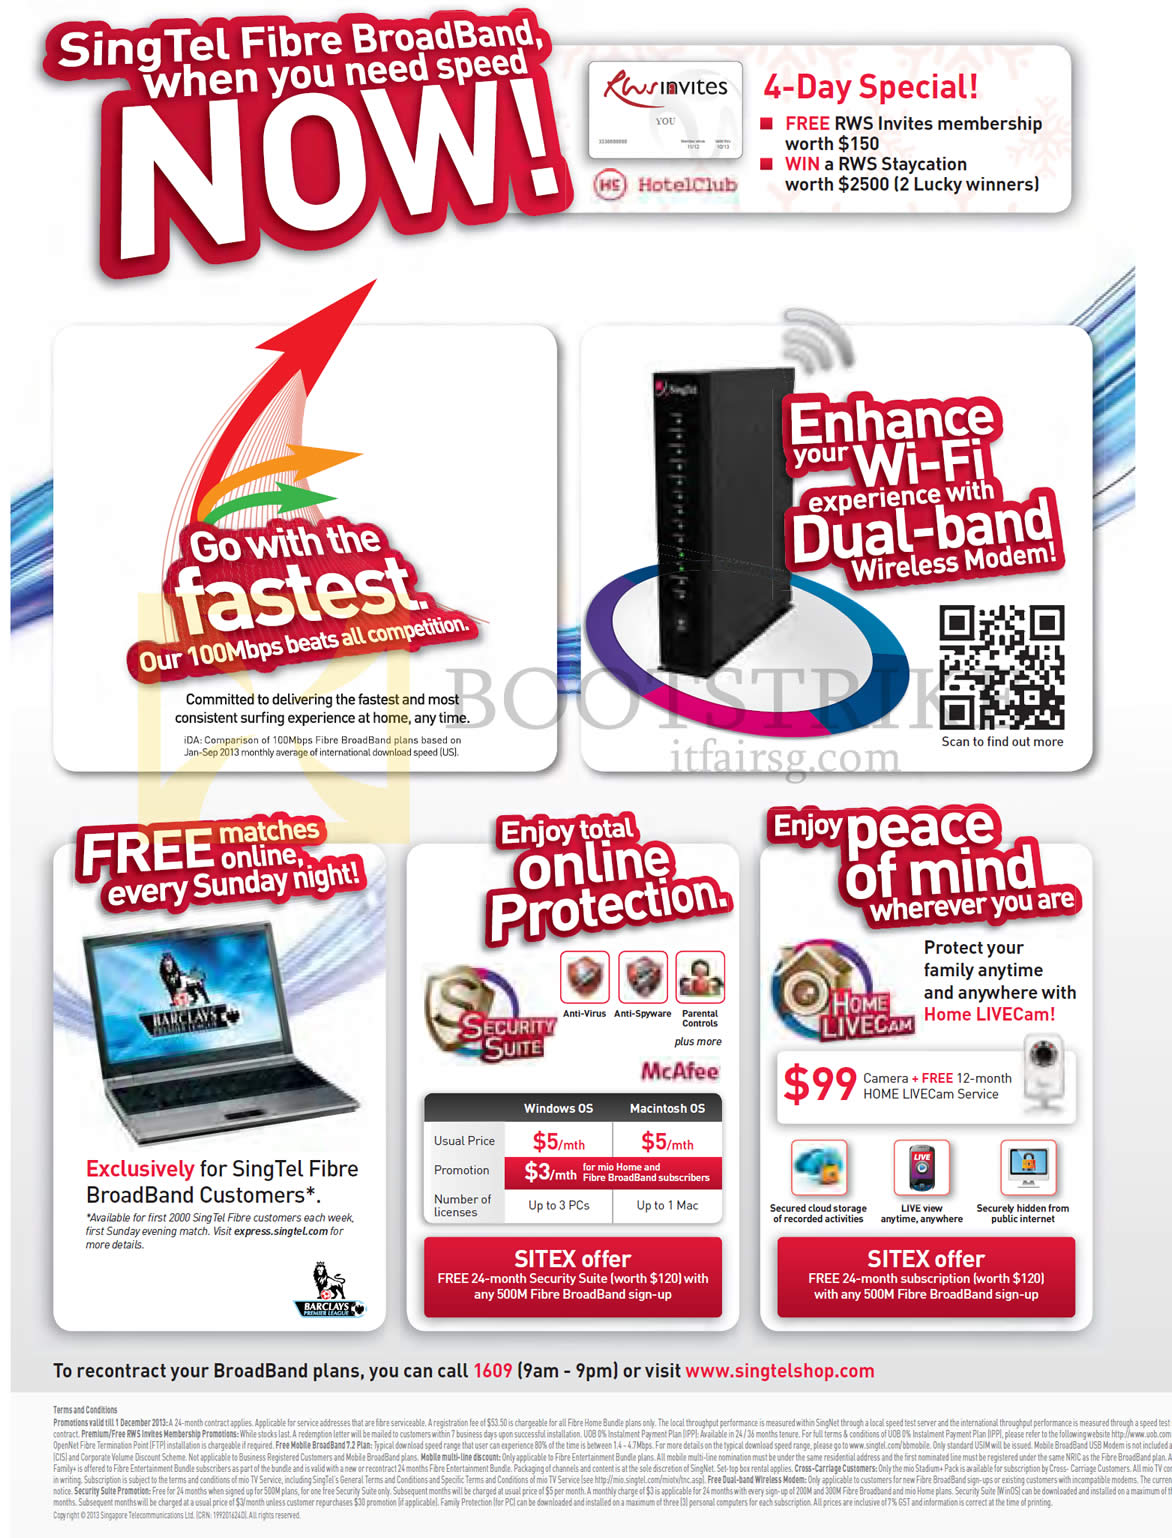 SITEX 2013 price list image brochure of Singtel Fibre Broadband Free RWS Invites Memberships, Dual Band Wireless Model, Free Matches, Online Protection, Home Livecam